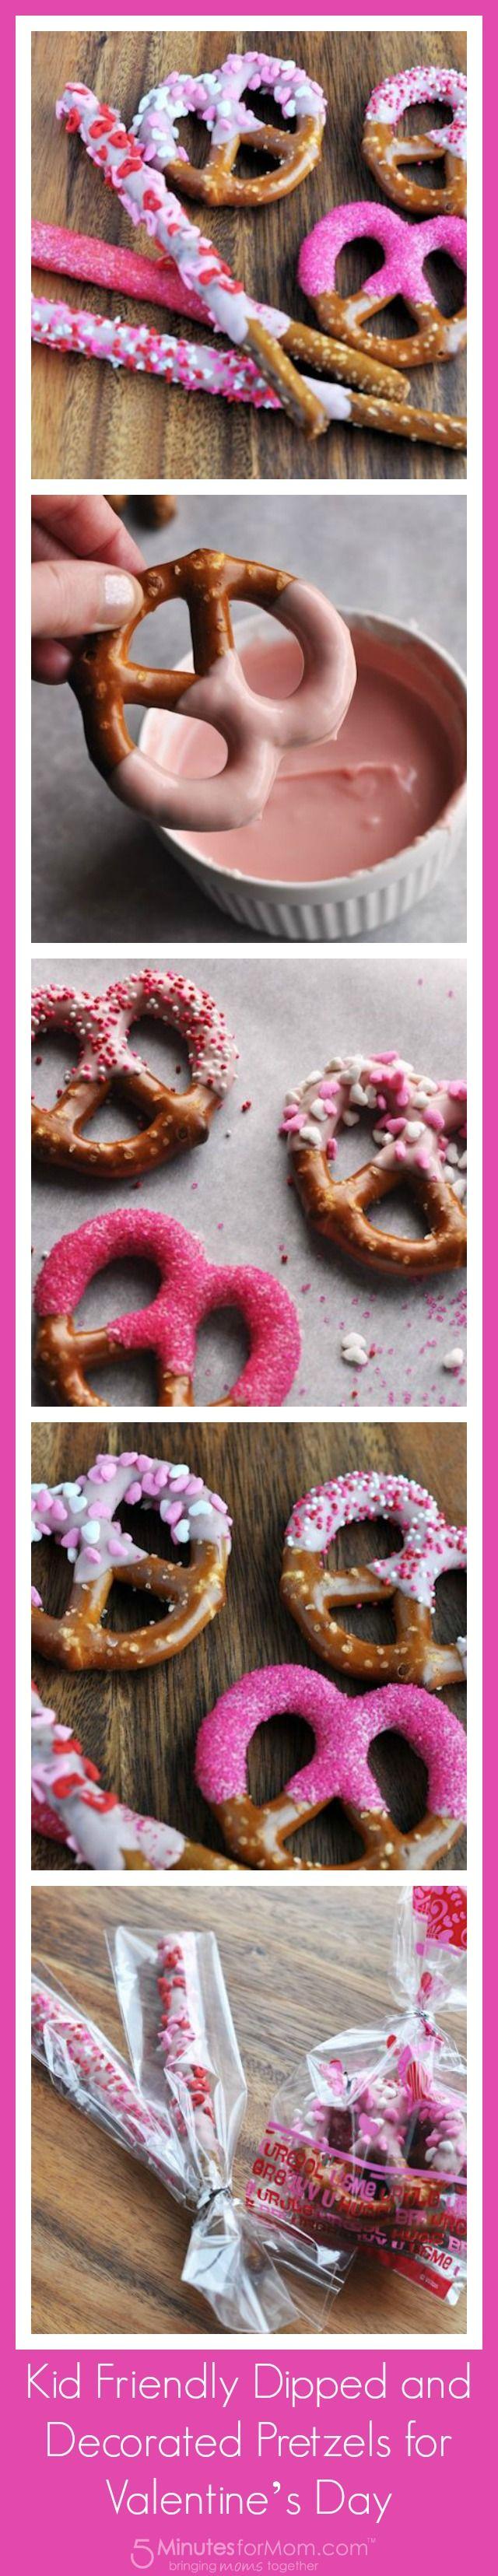 Wedding - Kid Friendly Dipped And Decorated Pretzels For Valentine's Day